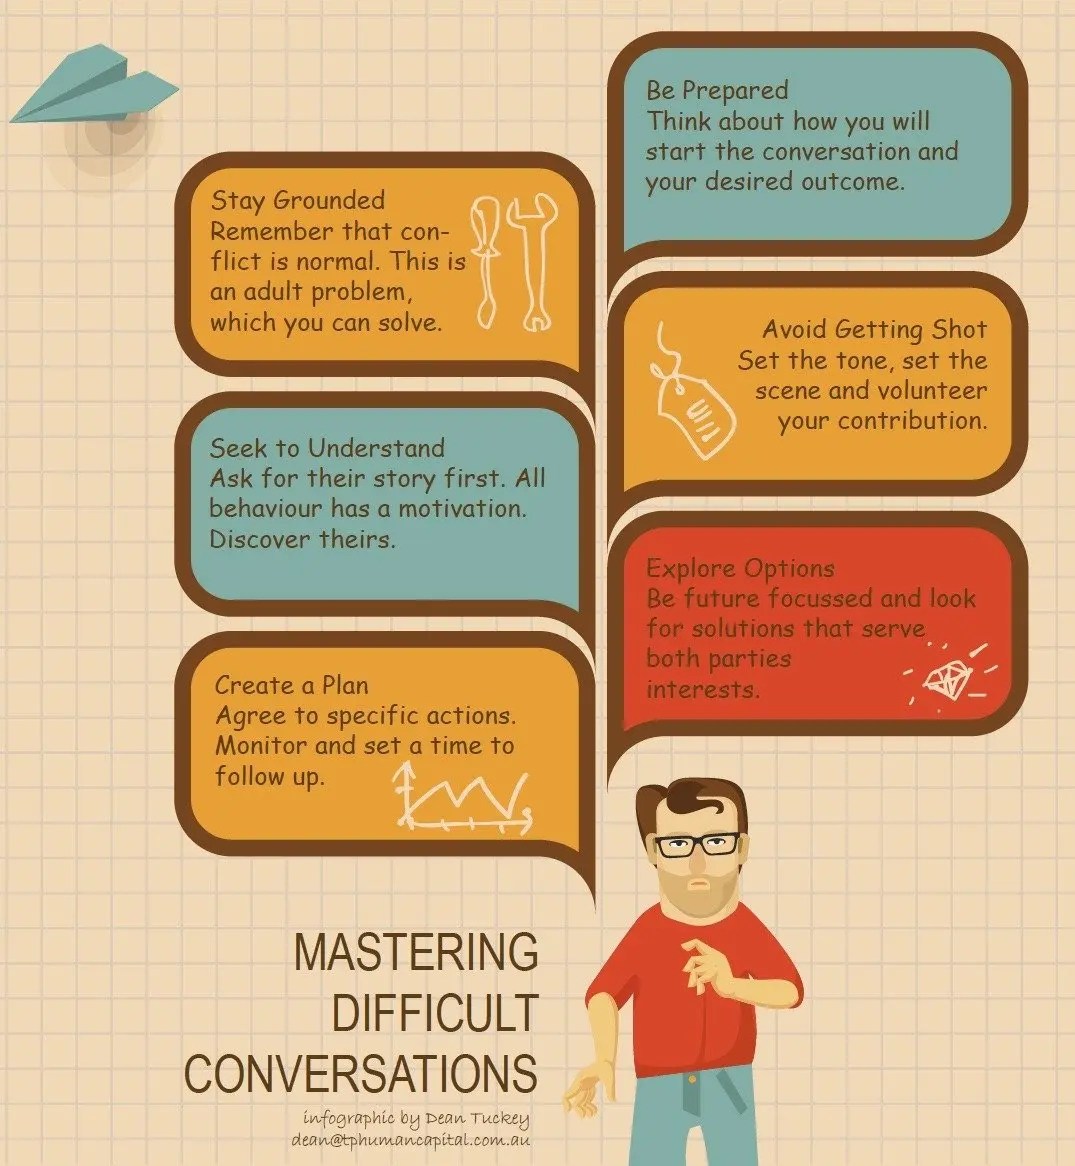 Mastering Difficult Conversations (infographic)